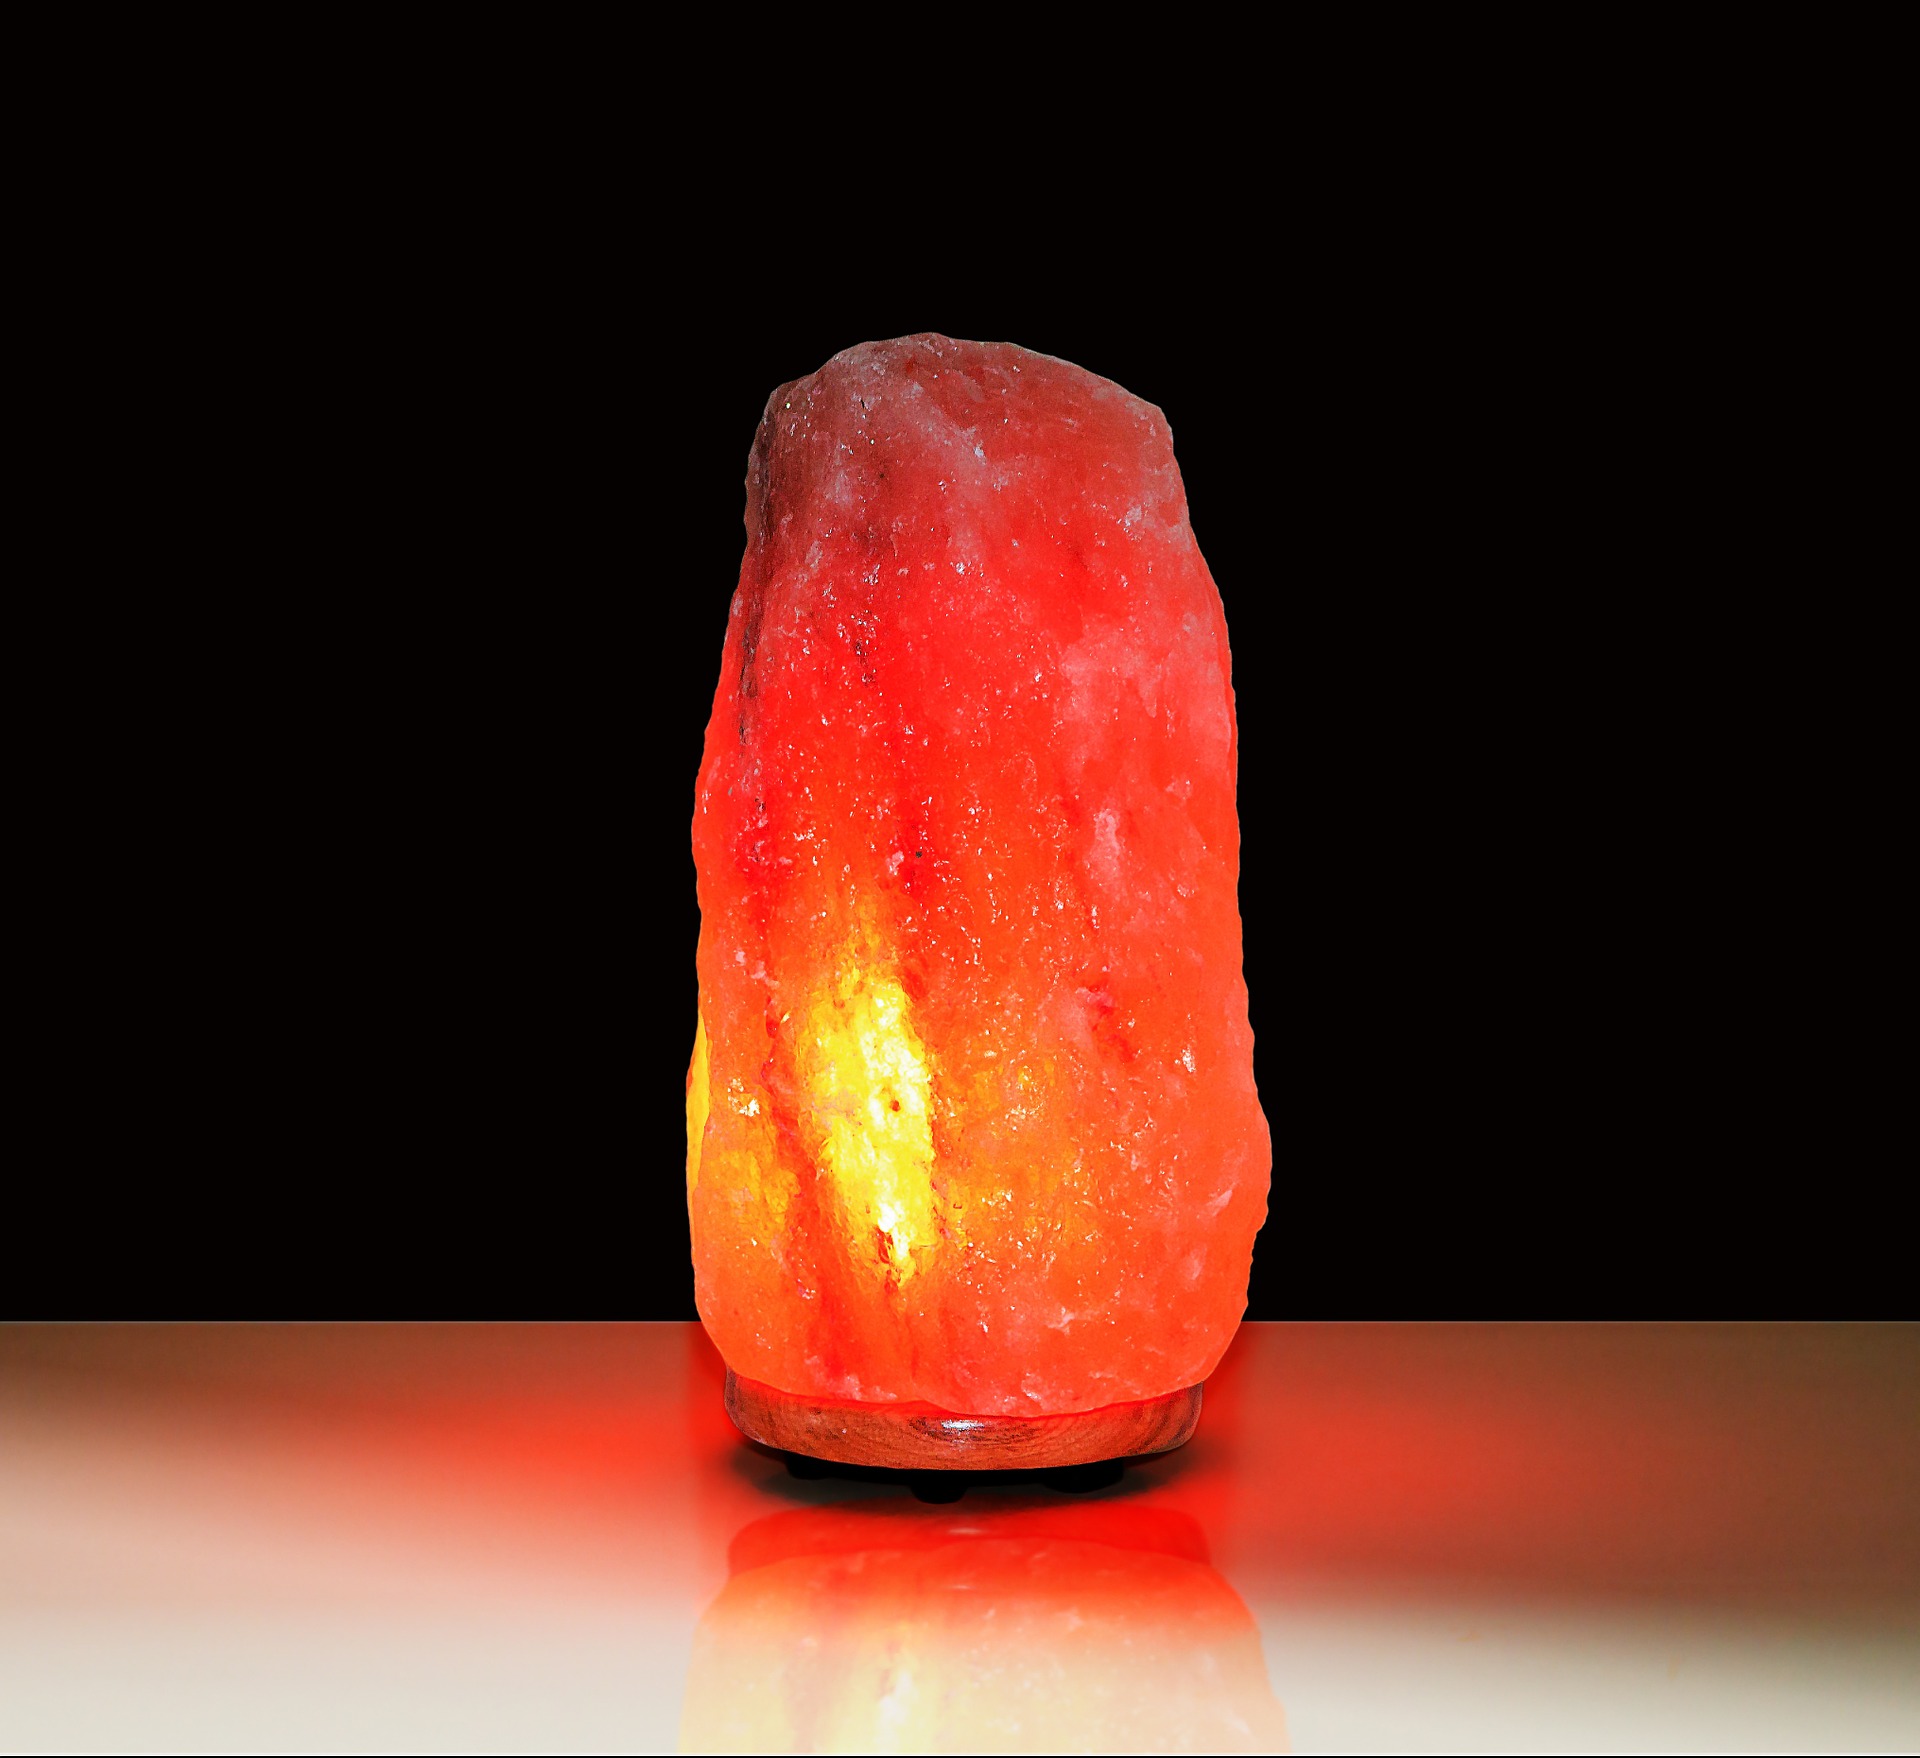 Image: Another way to clean your air: Salt lamps purify the air and charge it with healthy negative ions